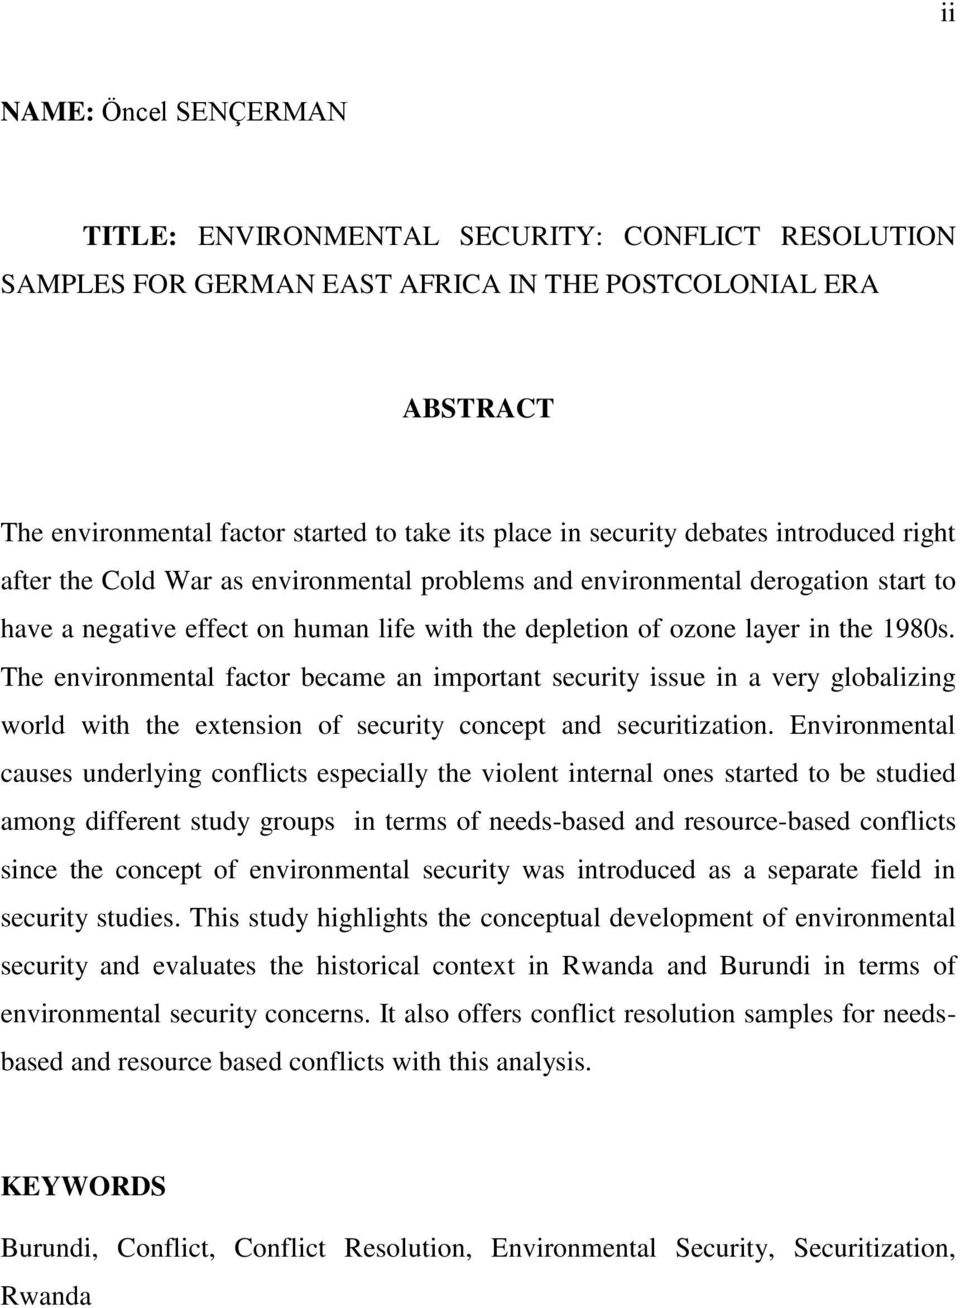 1980s. The environmental factor became an important security issue in a very globalizing world with the extension of security concept and securitization.